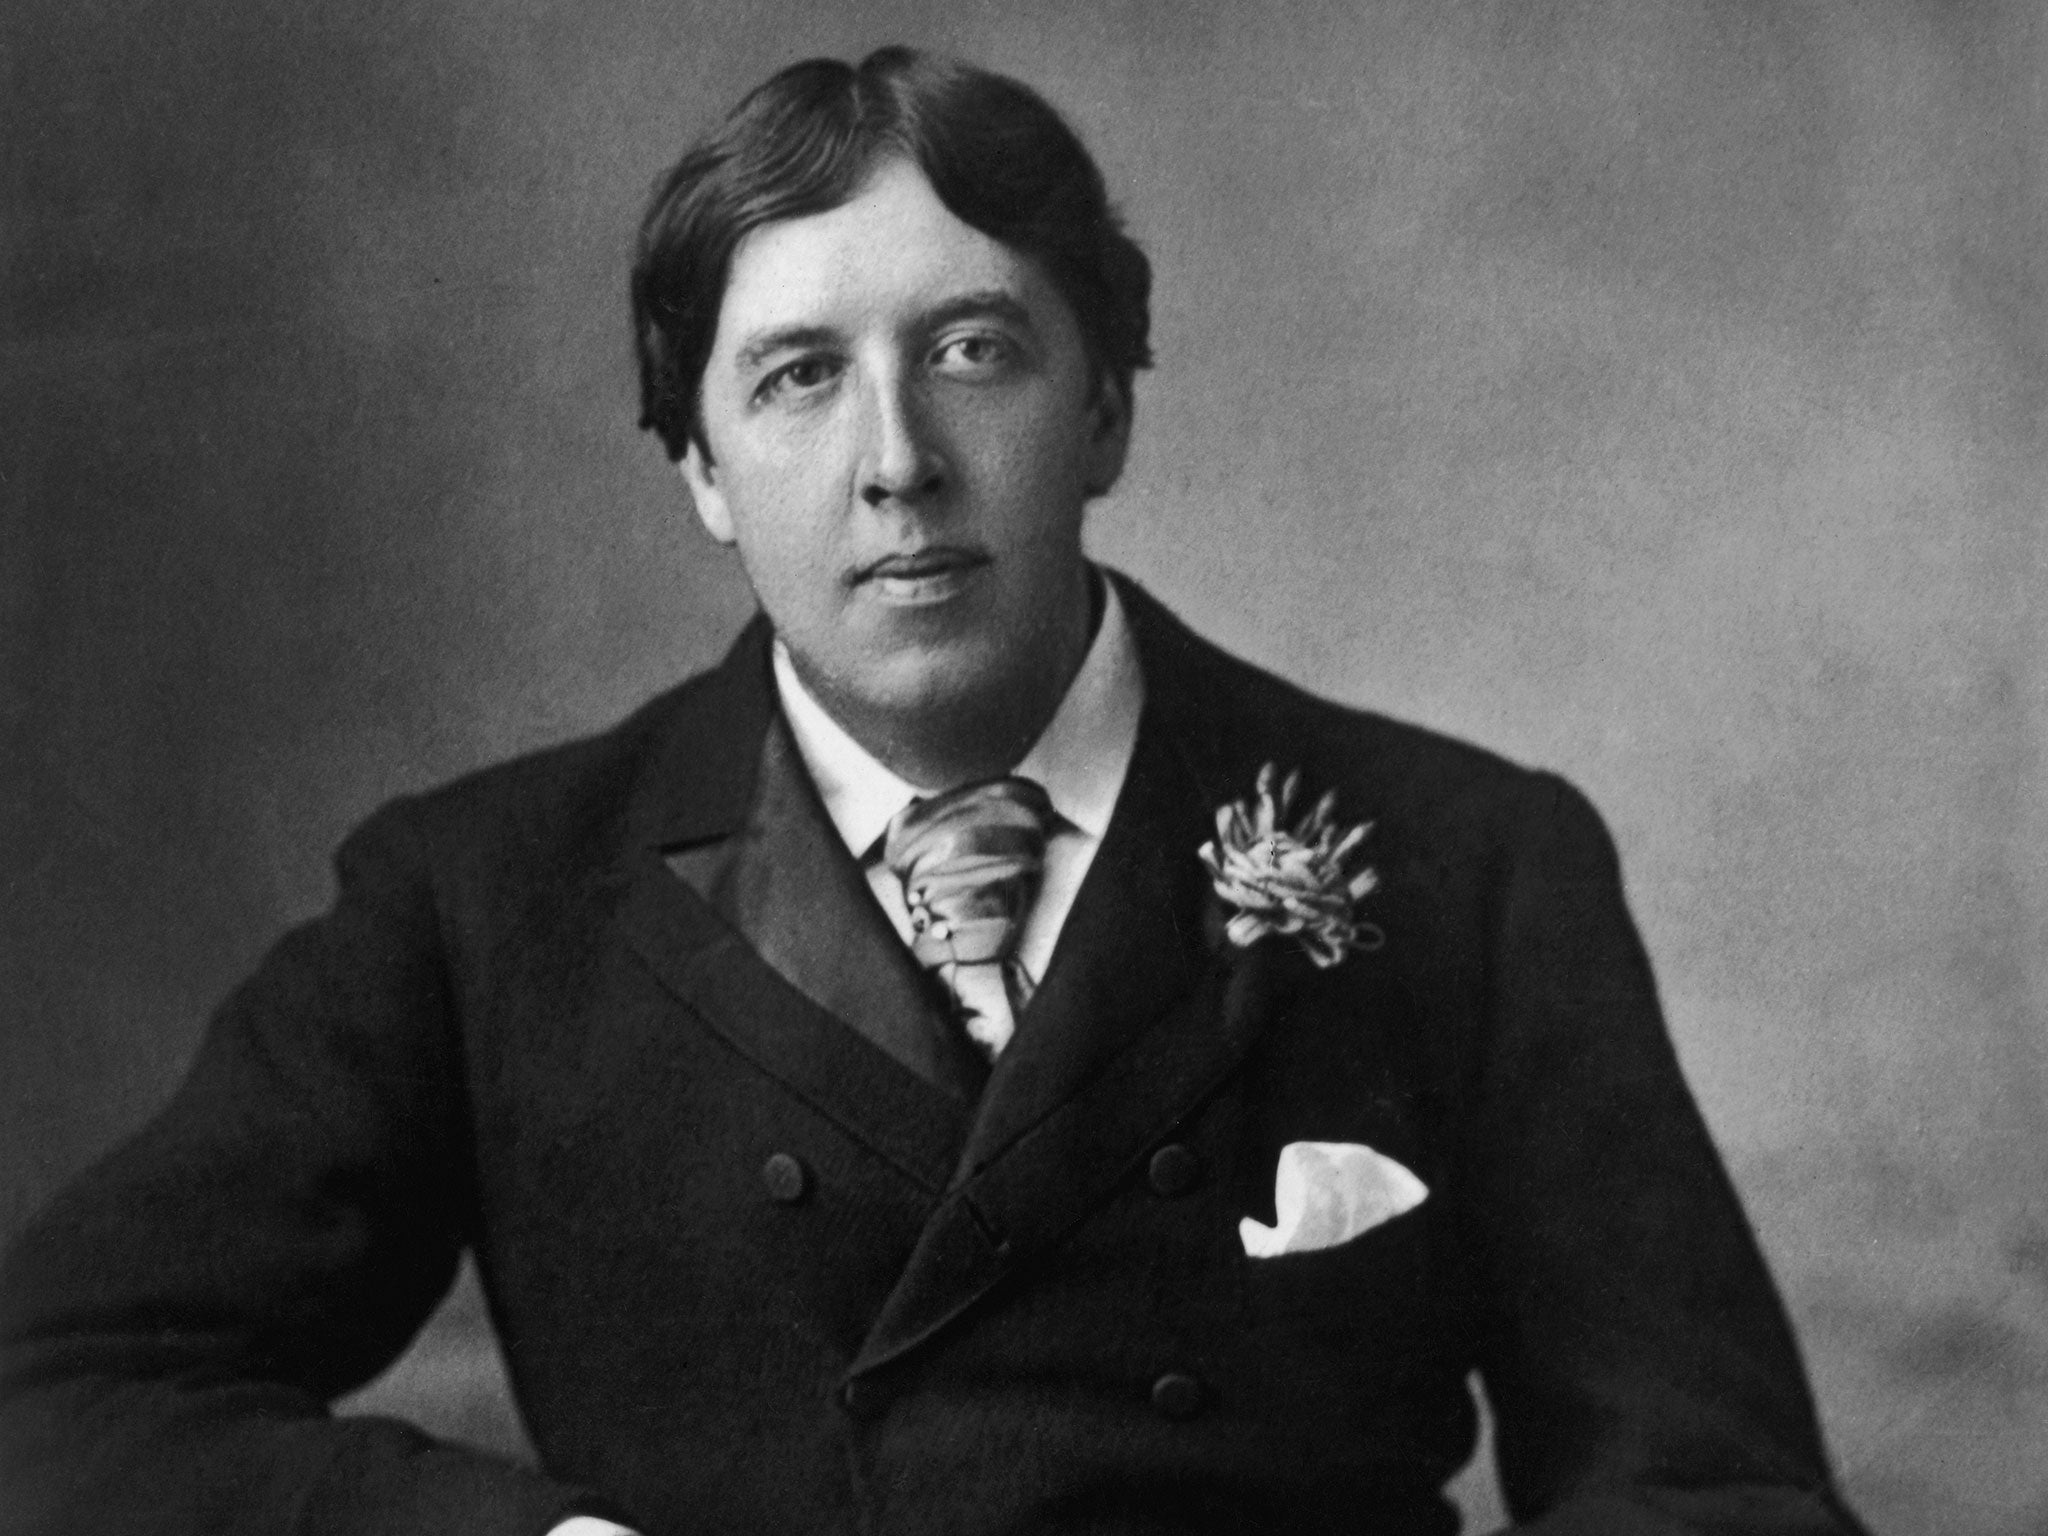 According to a list published online, Oscar Wilde was a member of the Freemasons